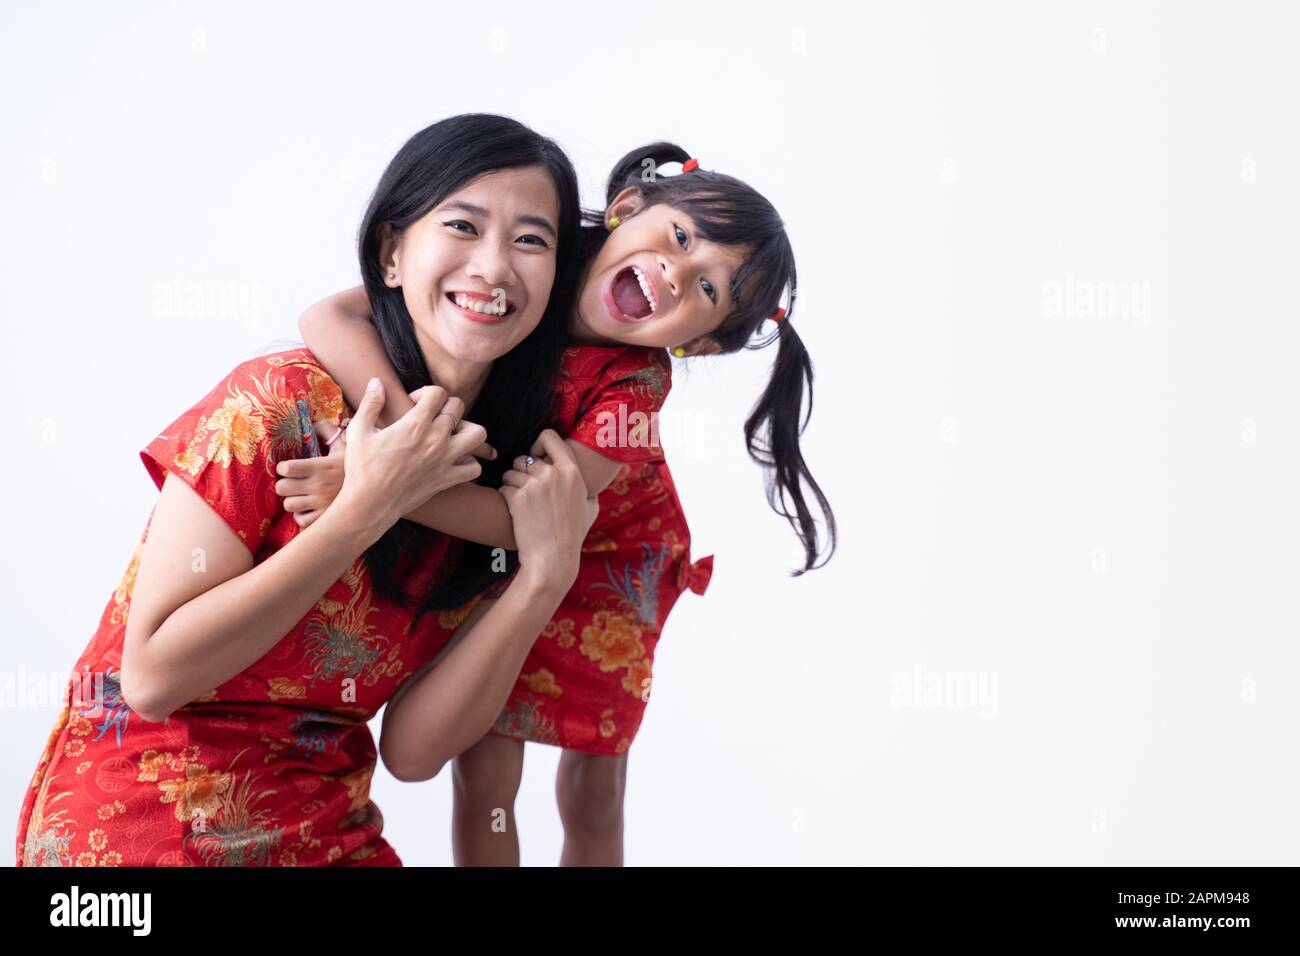 https://c8.alamy.com/comp/2APM948/asian-chinese-daughter-and-mother-smile-and-hug-together-show-happy-family-time-in-chinese-new-year-festival-cheongsam-costume-2APM948.jpg